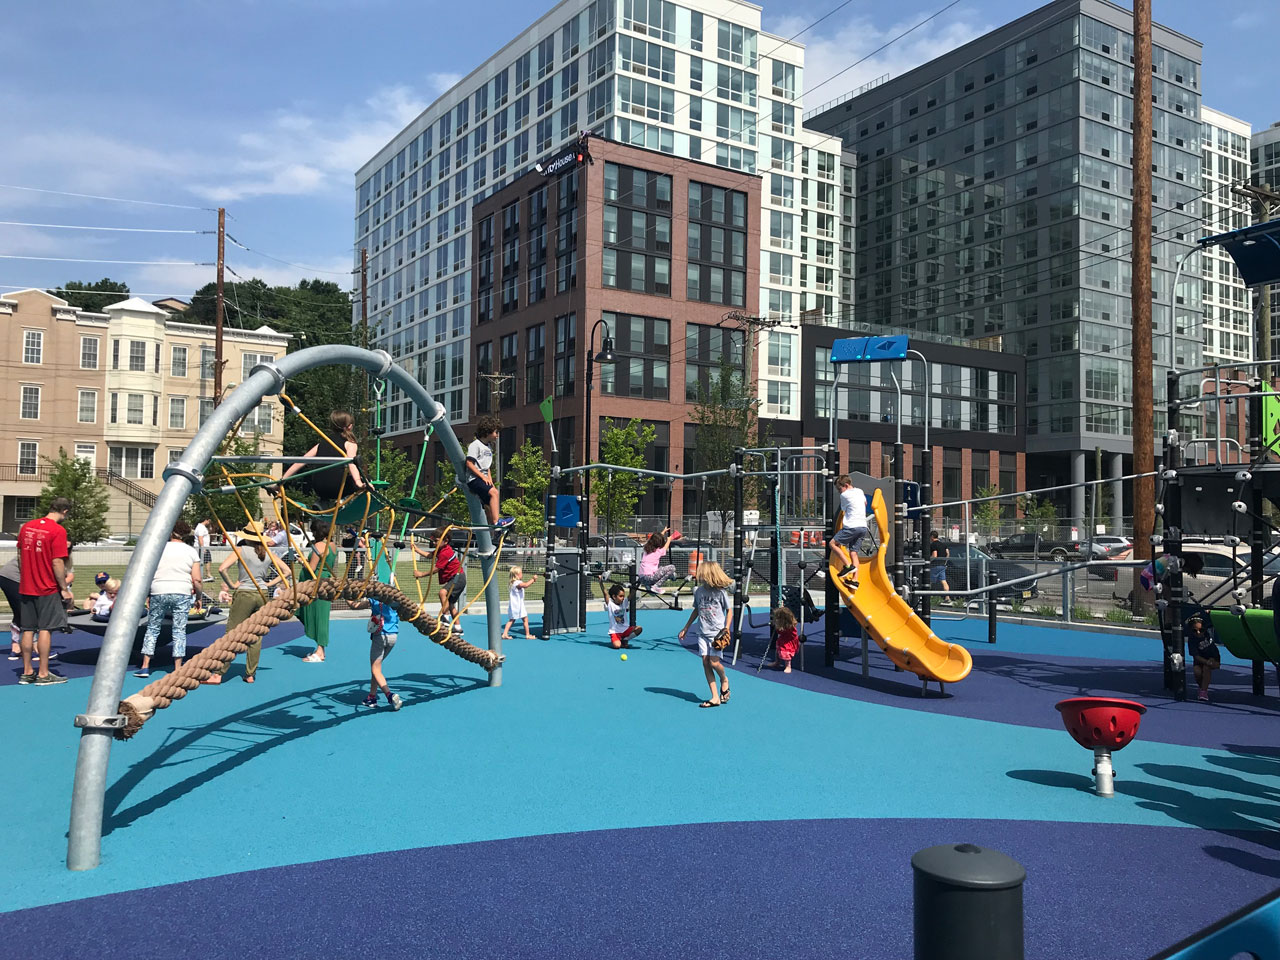 New Park At 7th And Jackson Streets Hoboken 1